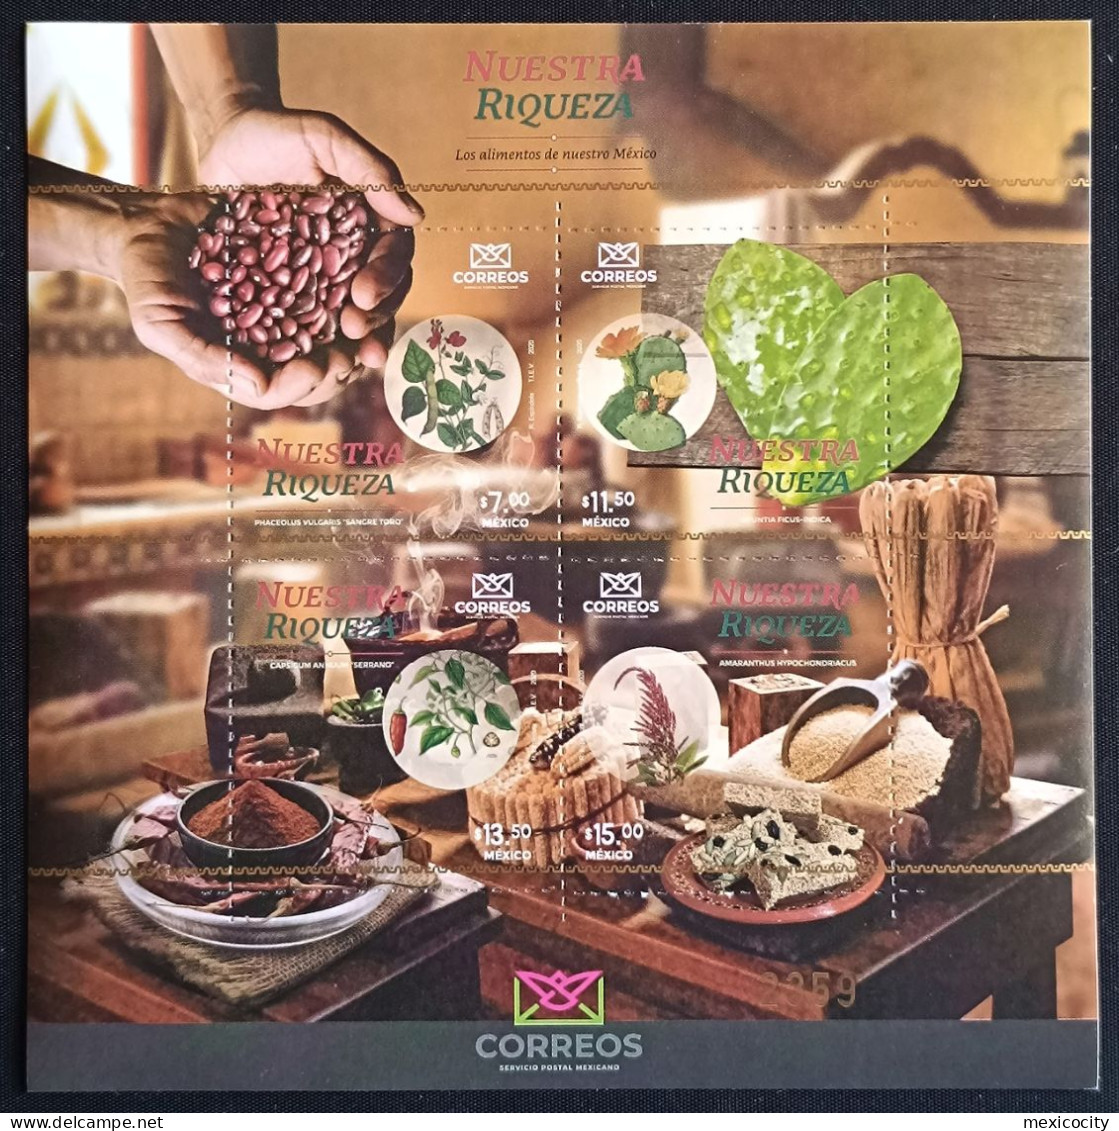 MEXICO 2020 FOODS Issue Nopal Cactii, Beans, Pepper, Amaranth LTD. ED. BLOC COLLECTOR, Mint NH Scarce - Mexiko